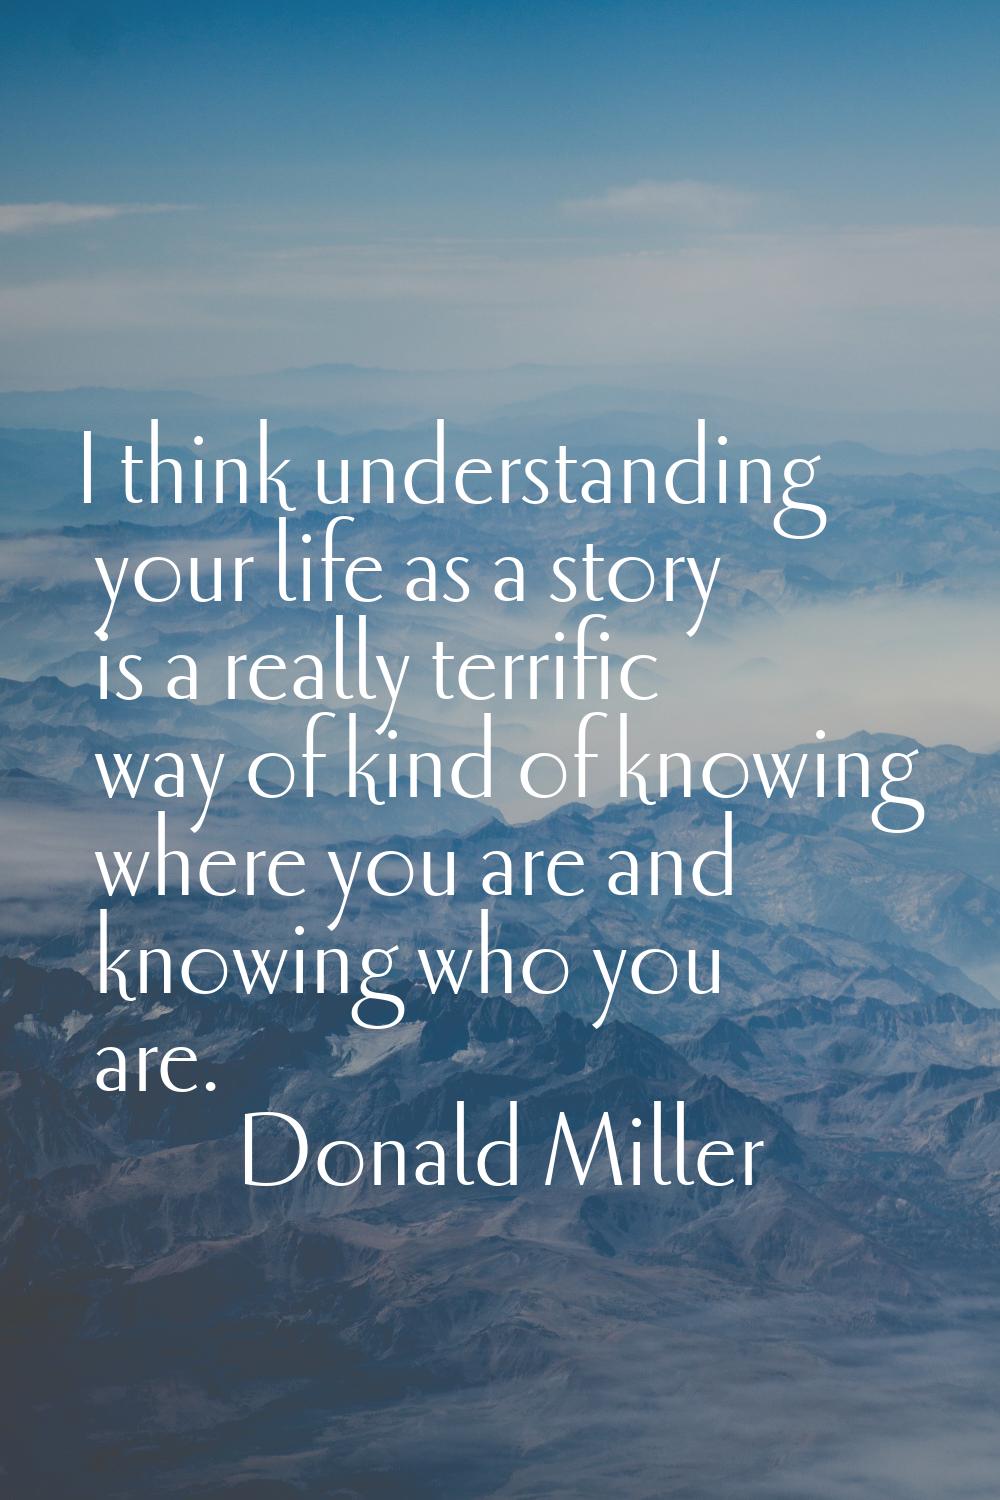 I think understanding your life as a story is a really terrific way of kind of knowing where you ar